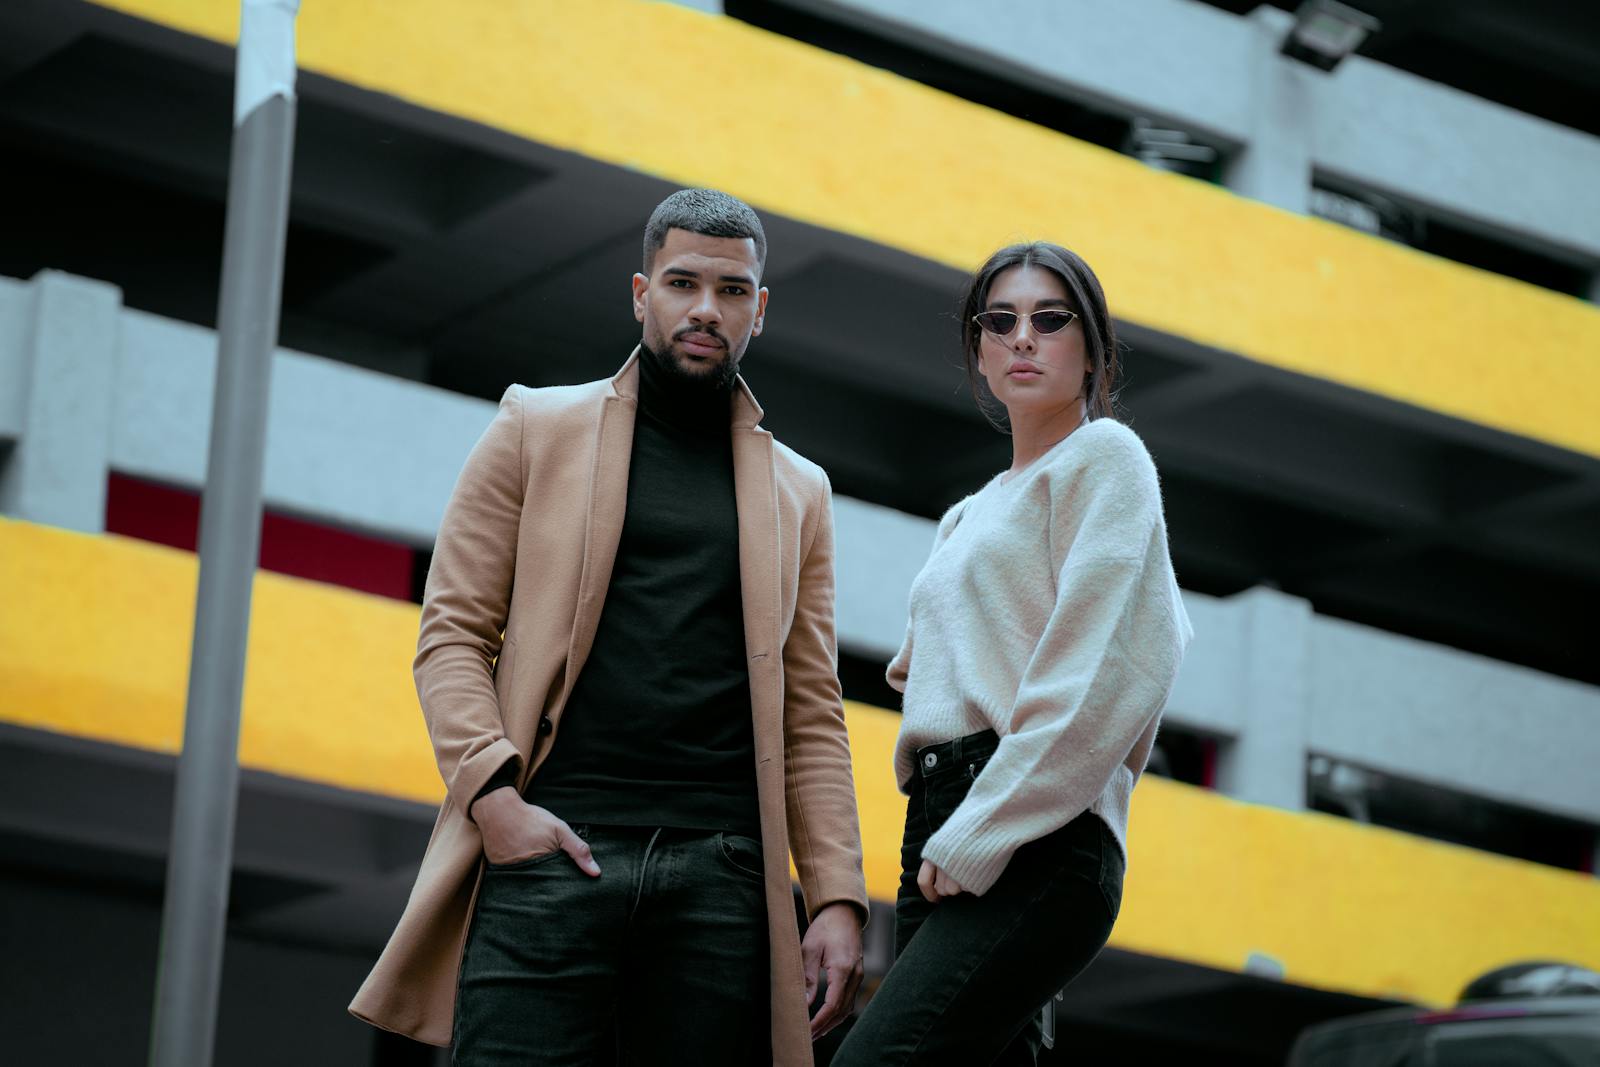 Models in a Beige Coat and White Sweater in front of the Parking Garage